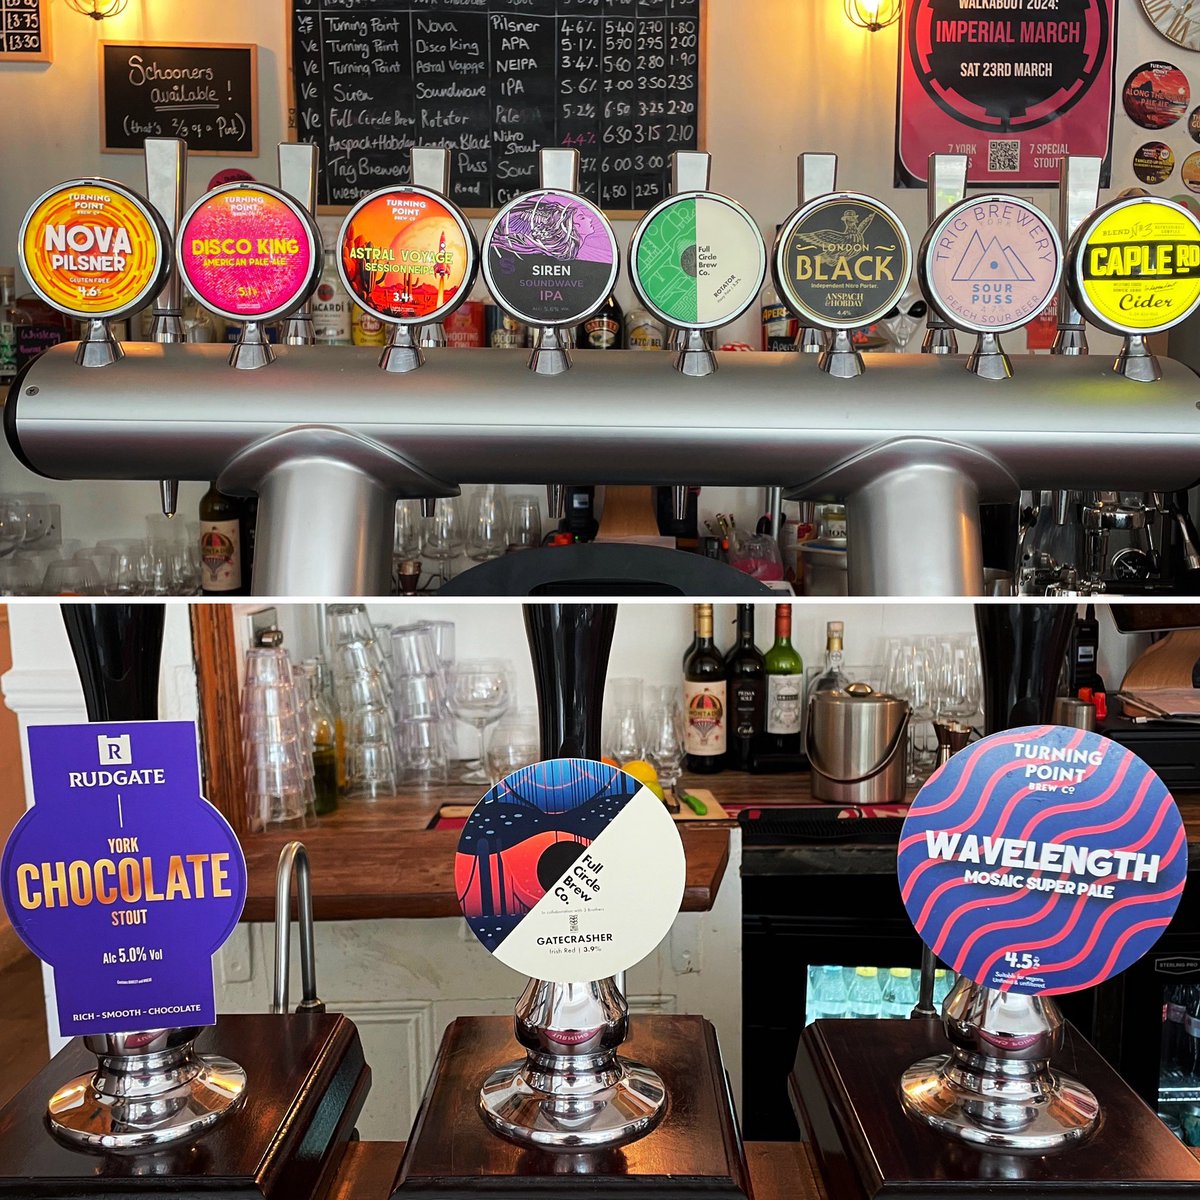 Plenty of crackers on tap!! What will you be drinking??